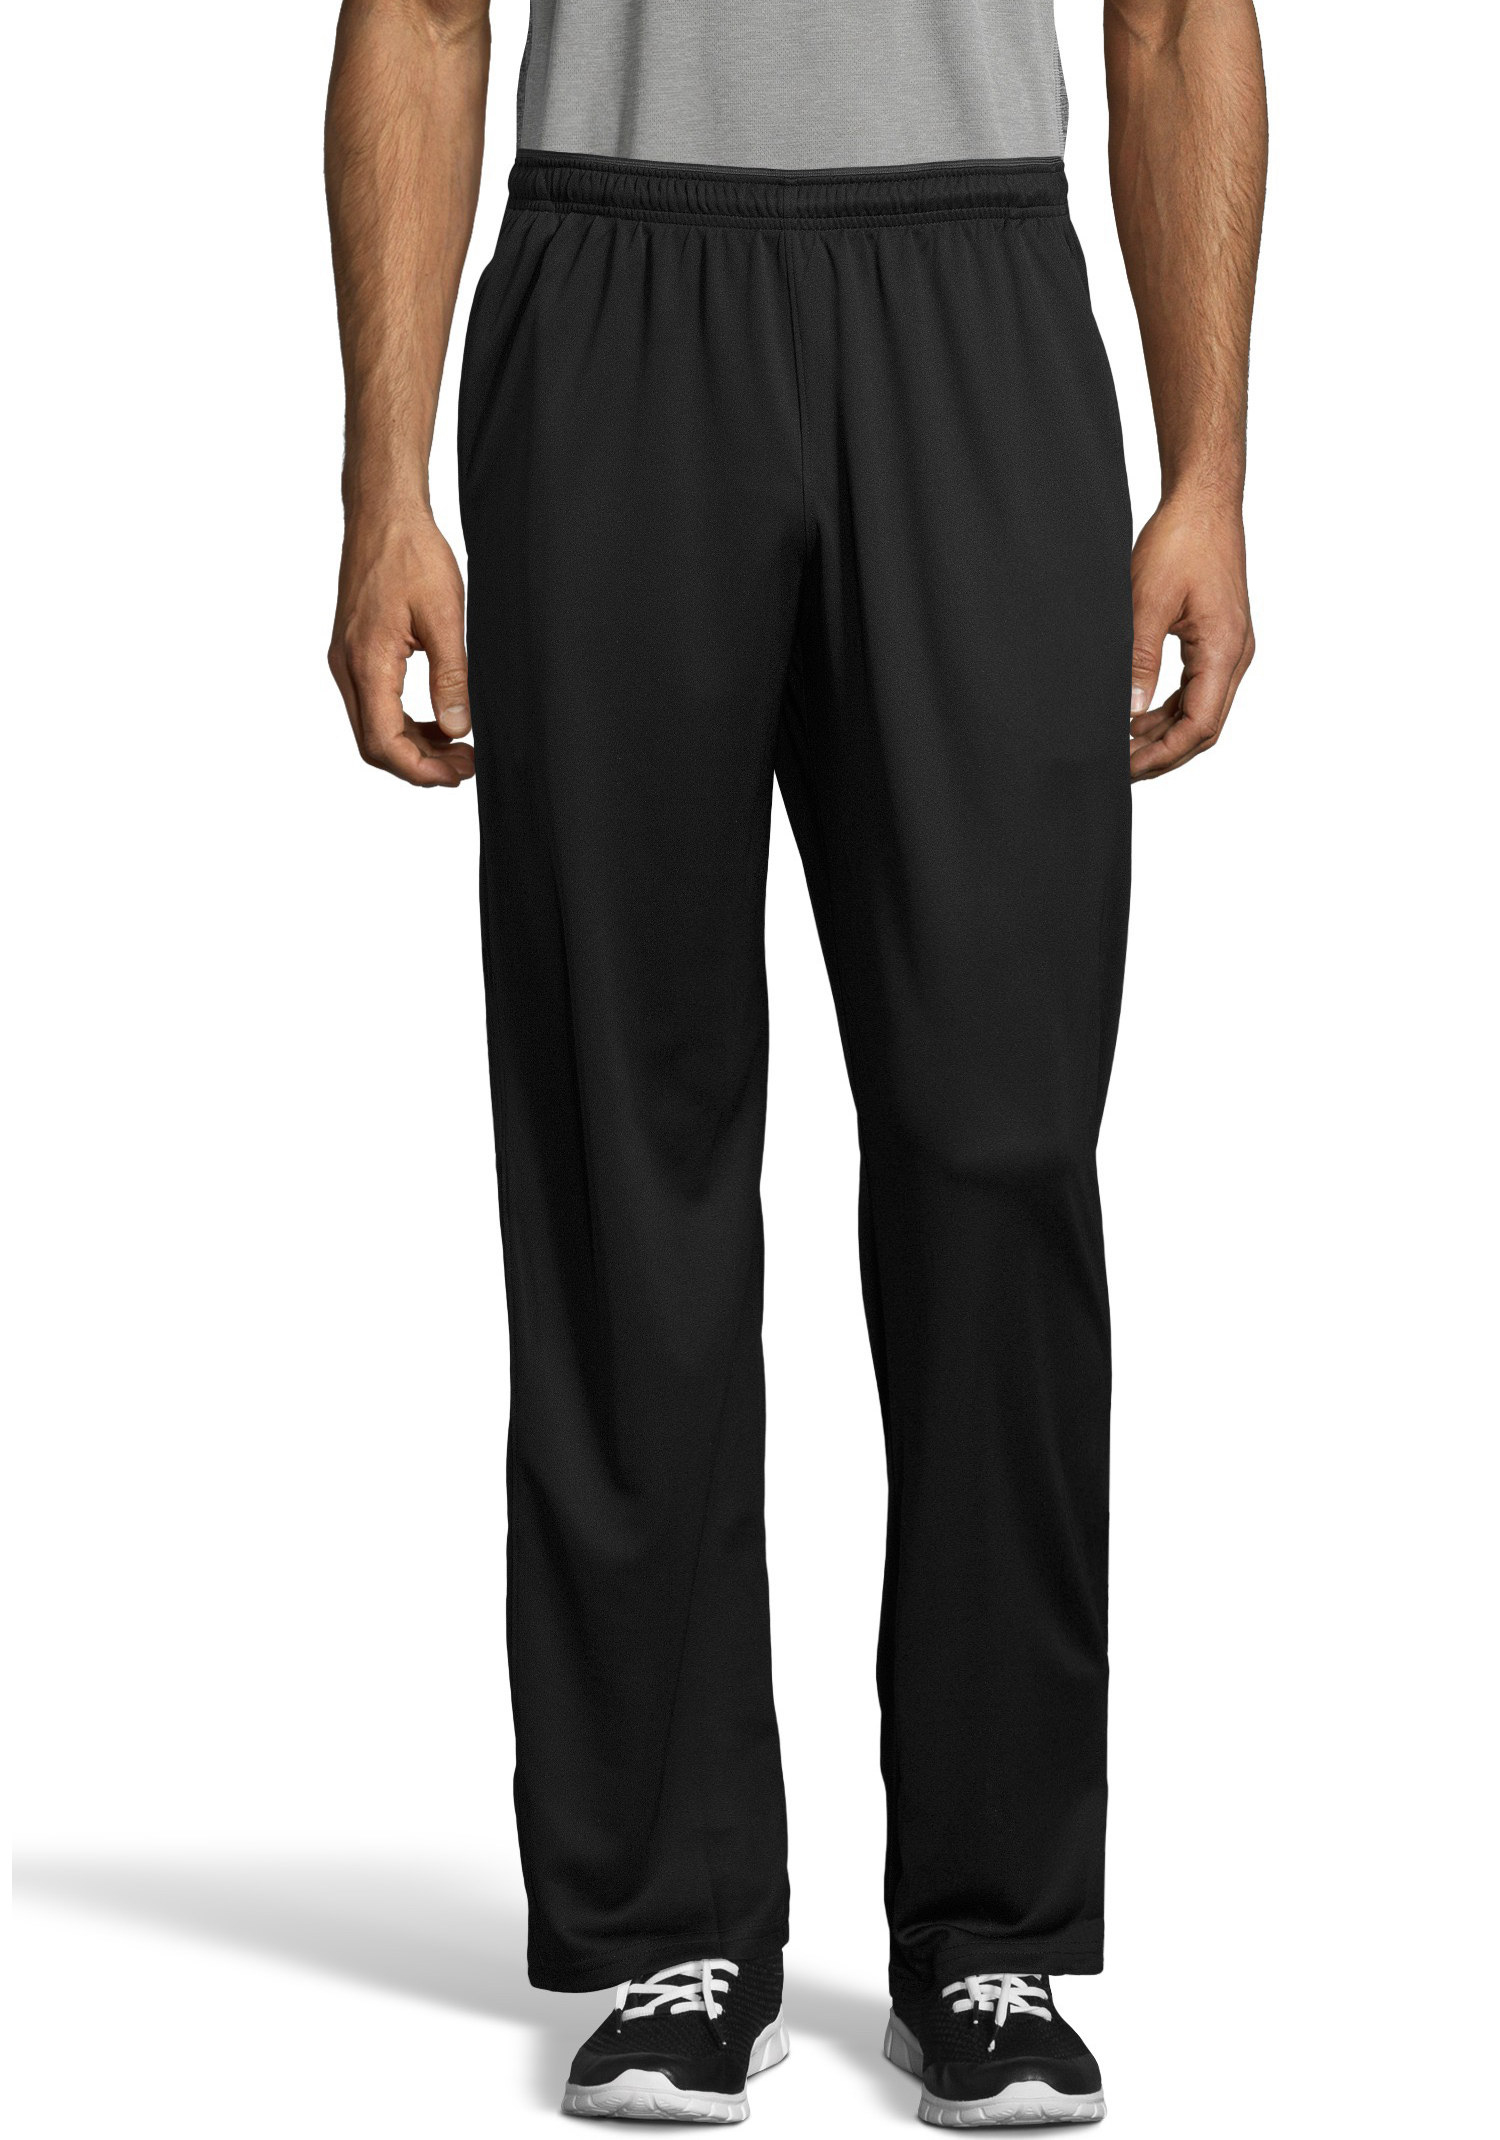 Sweatpants From Walmart That Are Actually Stylish